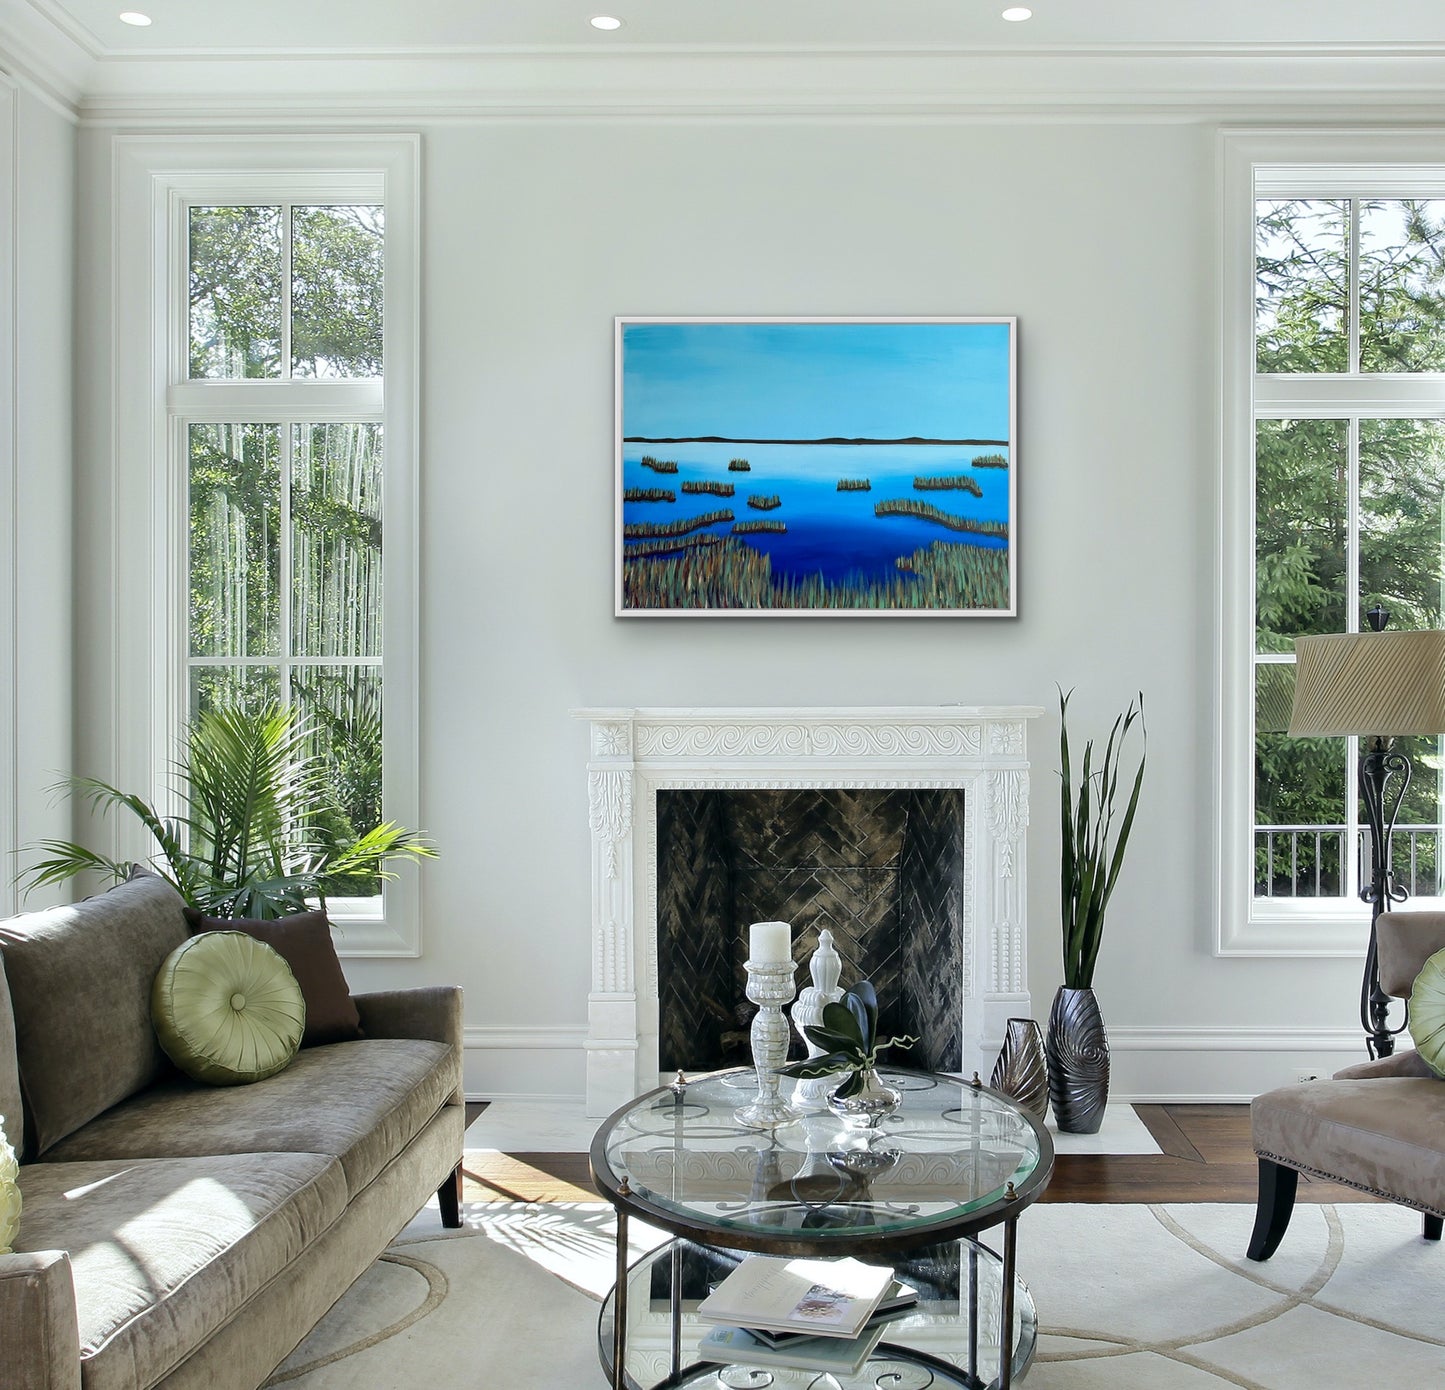 Boston Travel Artist Alexandra Wuyke Art painting "Everglades" hangs over a fireplace in a living room.